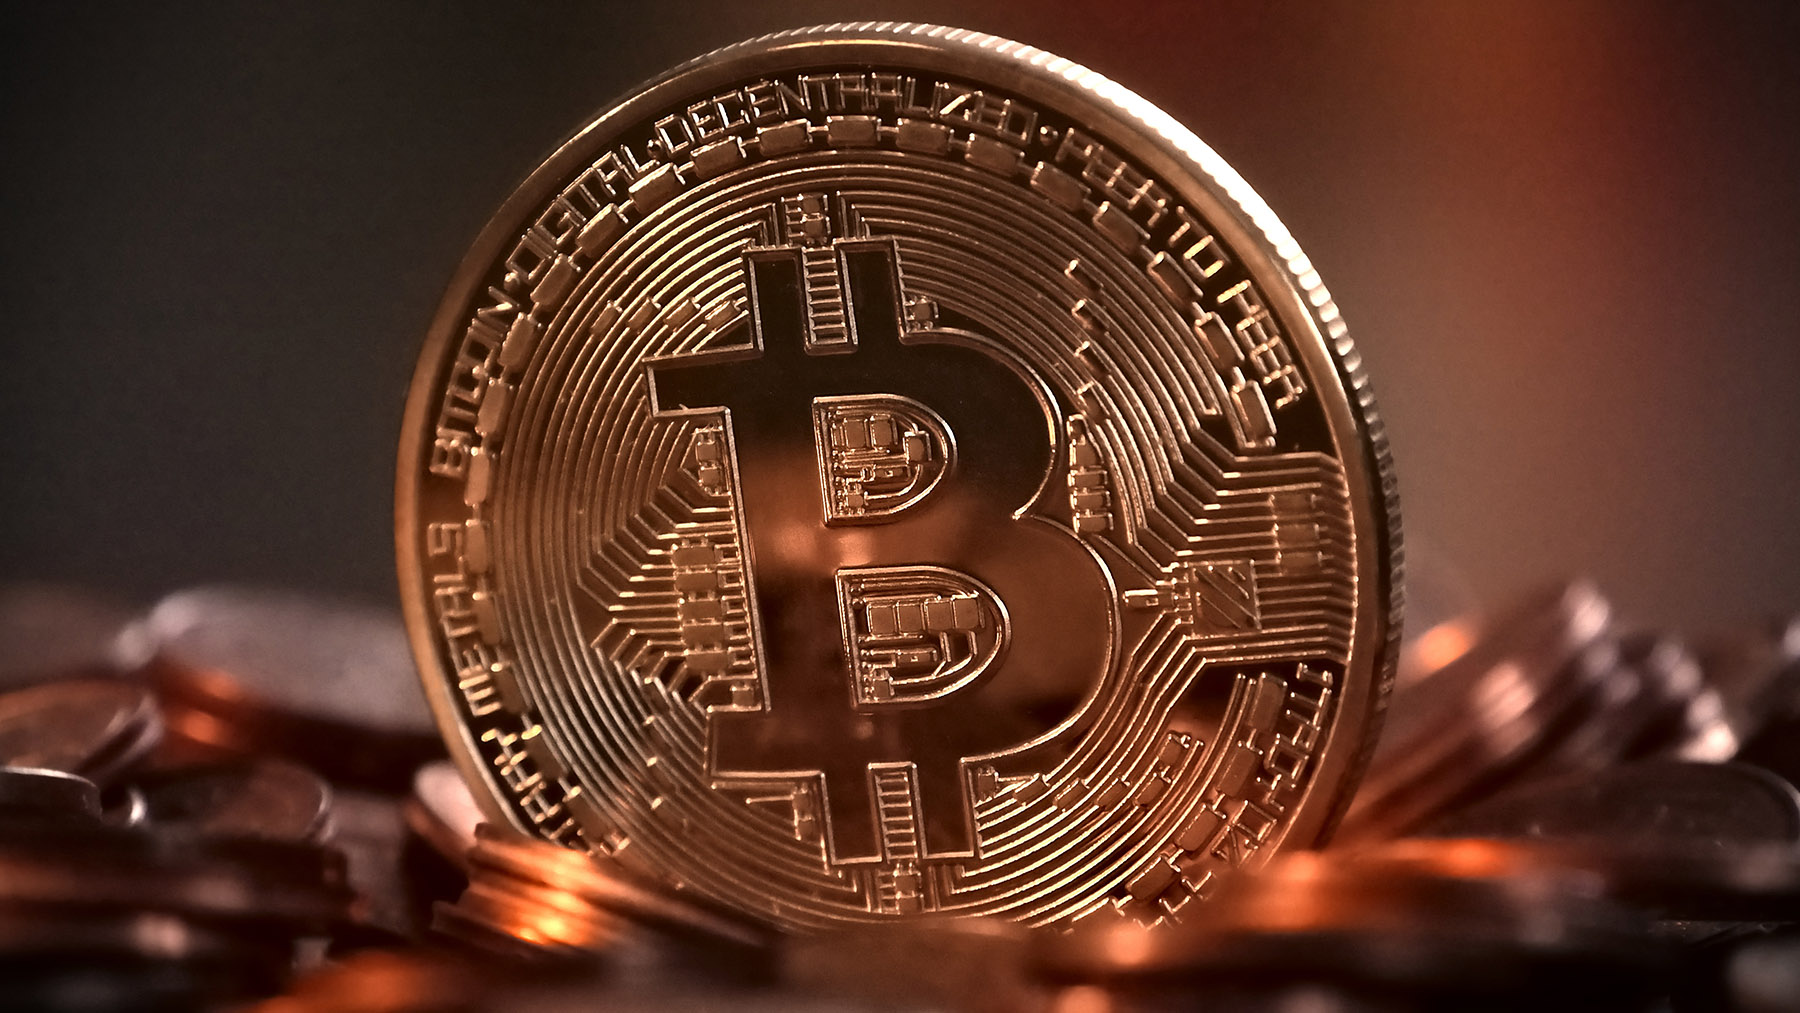 Photo of coins with the bitcoin symbol on them (Image from Creative Commons, courtesy of RawPixel.com)